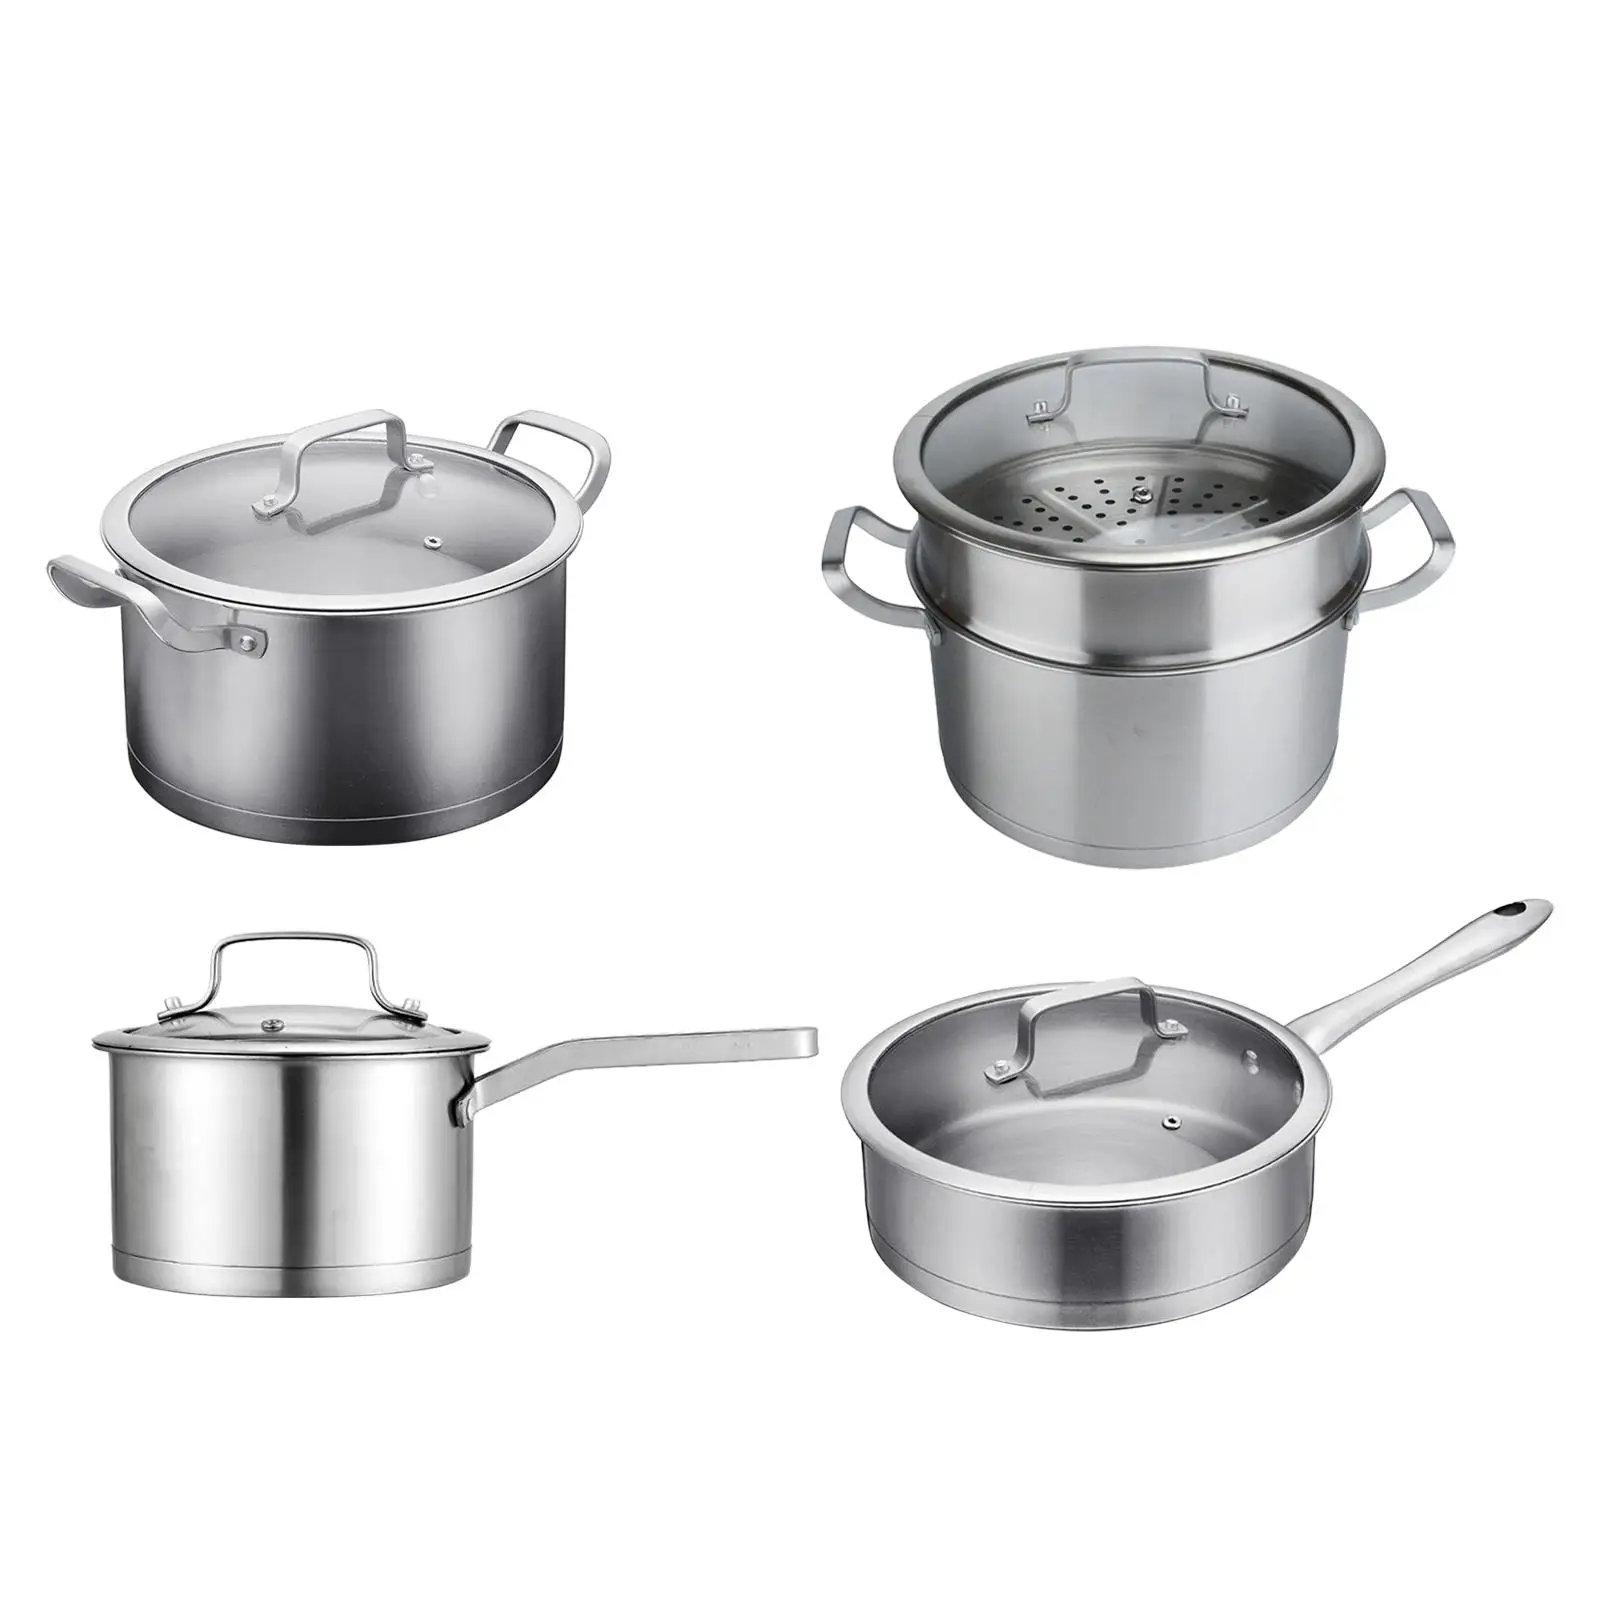 Kitchen Utensils with Glass Lids Frying Pan Portable Stockpot with Lid Soup Pot for Home Cafe Bar Restaurant Kitchen Countertop